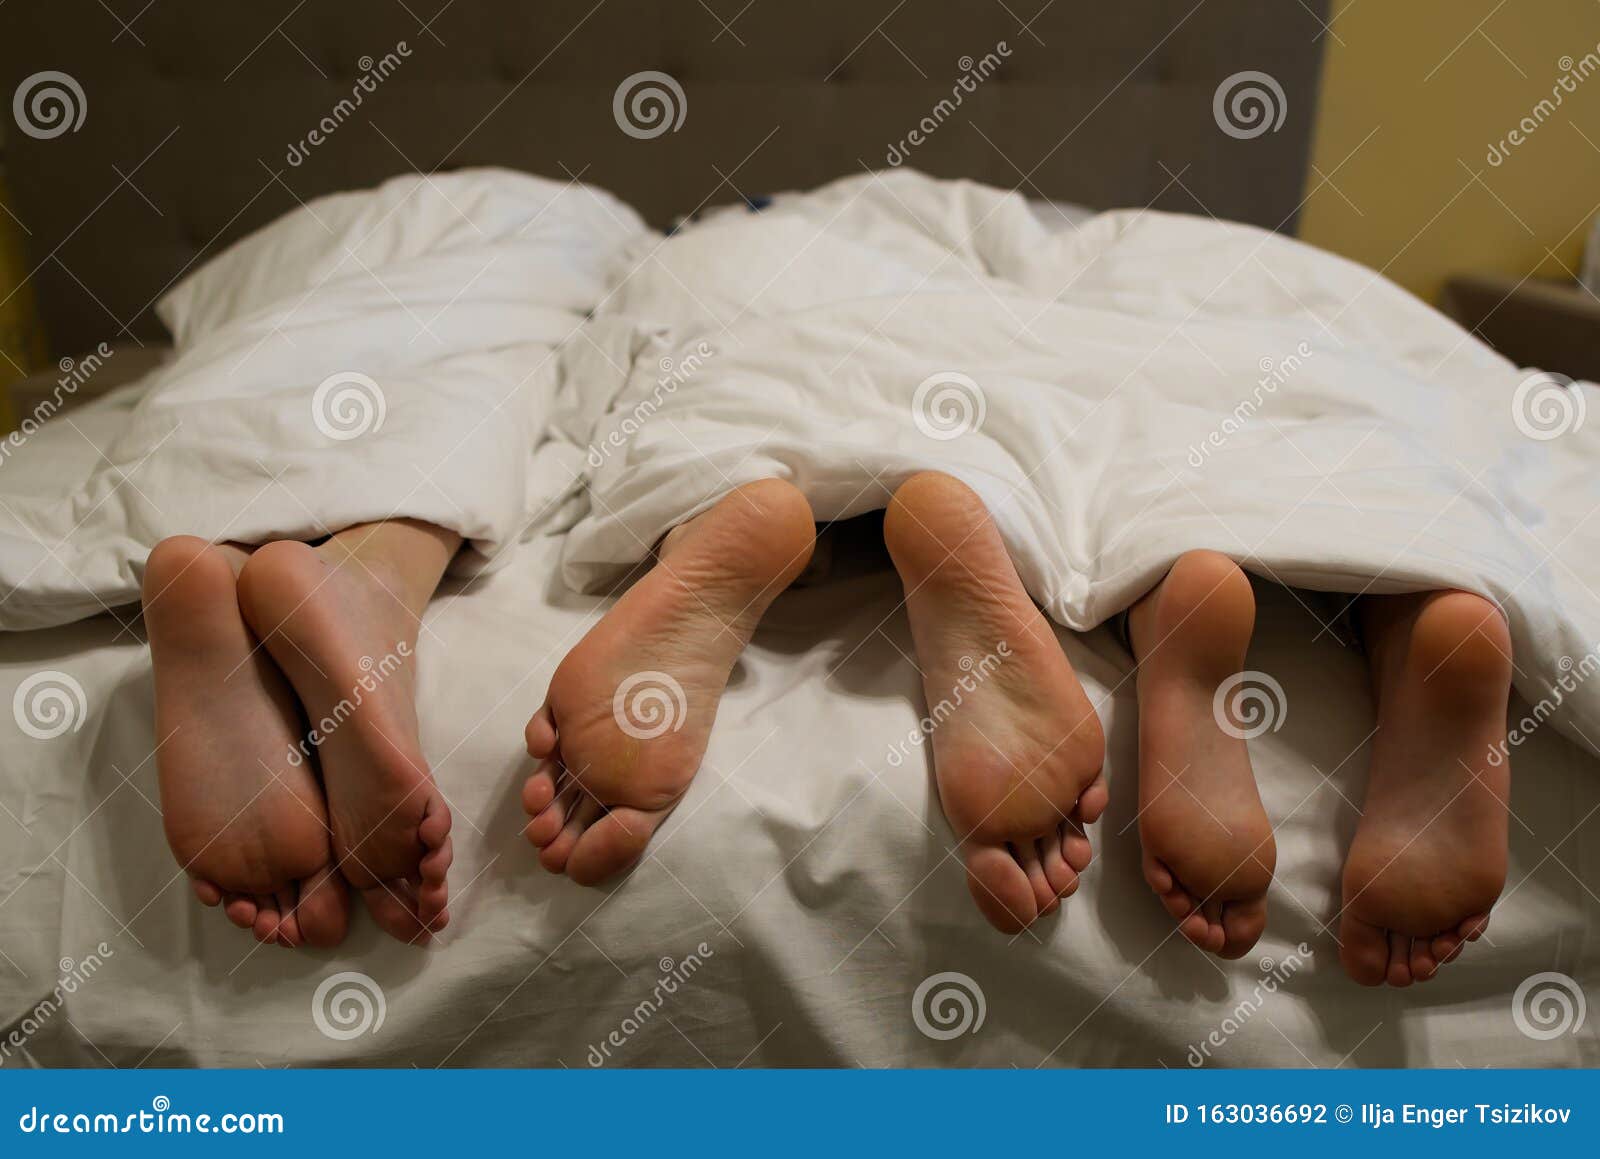 Three Pairs Of Legs In Bed Under A White Blanket Stock Photo Image Of